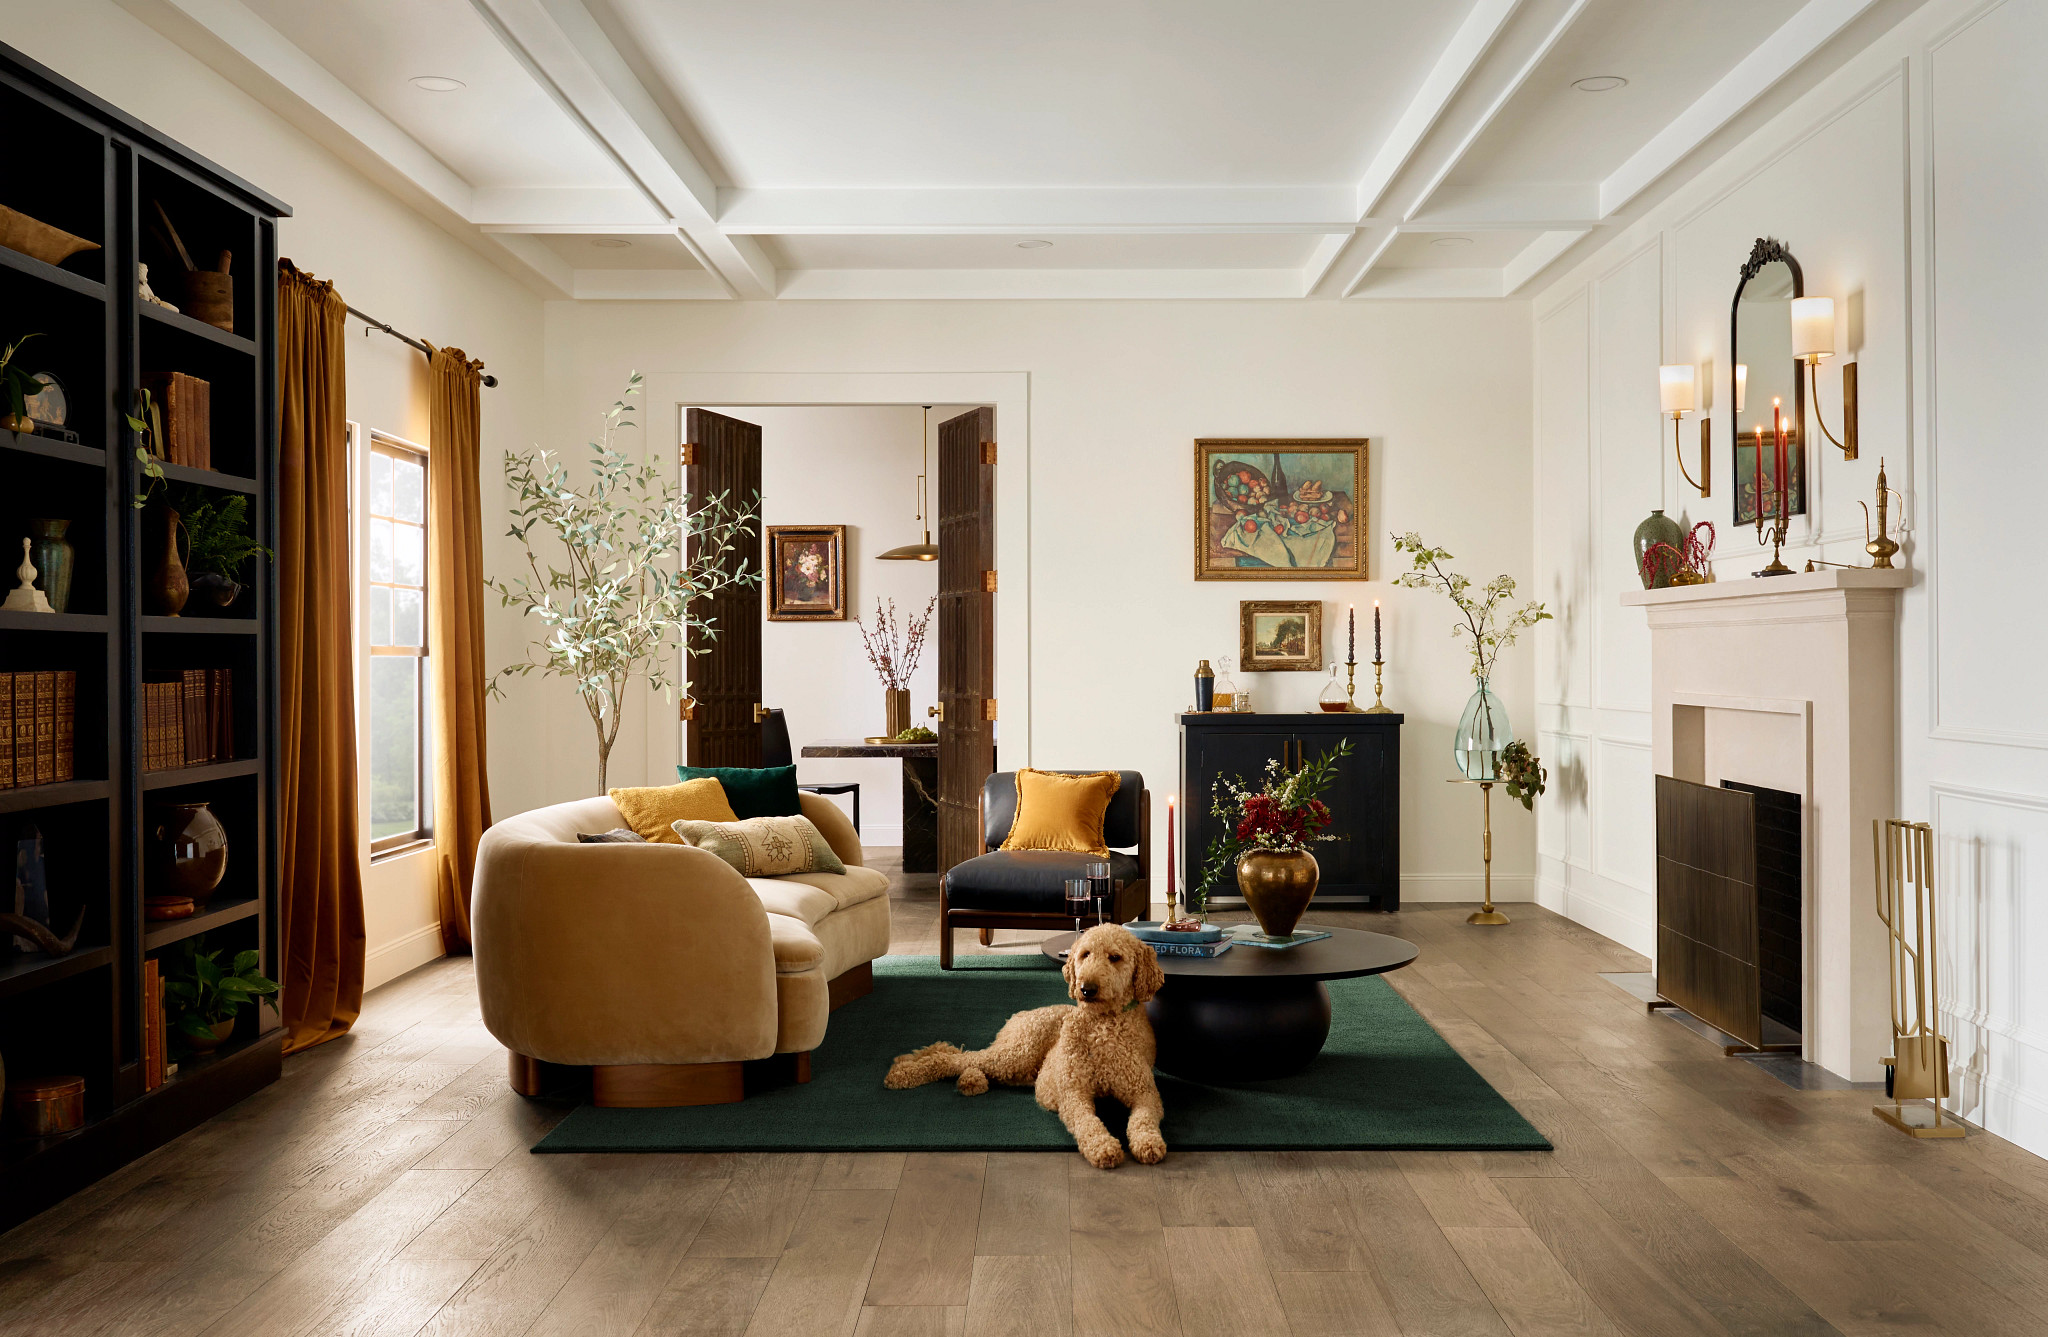 A dog sits on a green rug over hardwood in an ecclectic living room.